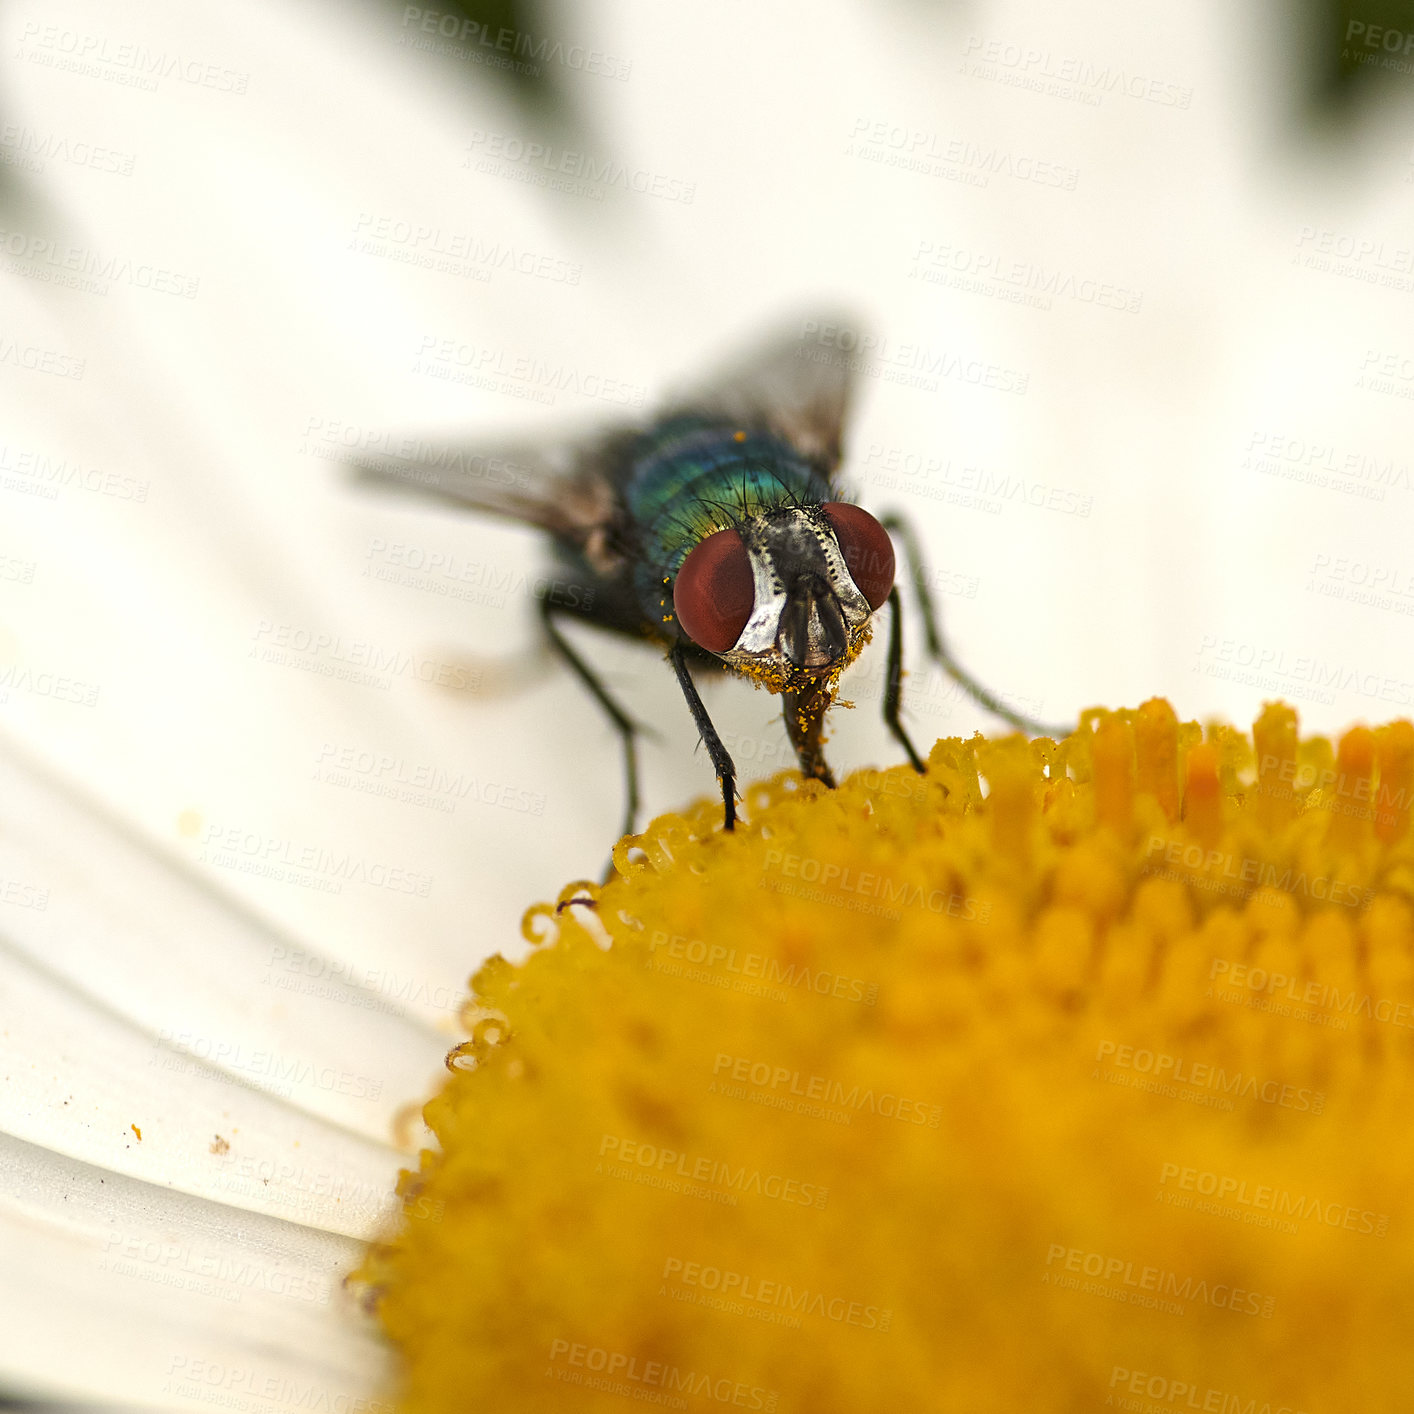 Buy stock photo Common green bottle fly pollinating a white daisy flower. Closeup of one blowfly feeding off nectar from a yellow pistil center on a plant. Macro of a lucilia sericata insect and bug in an ecosystem